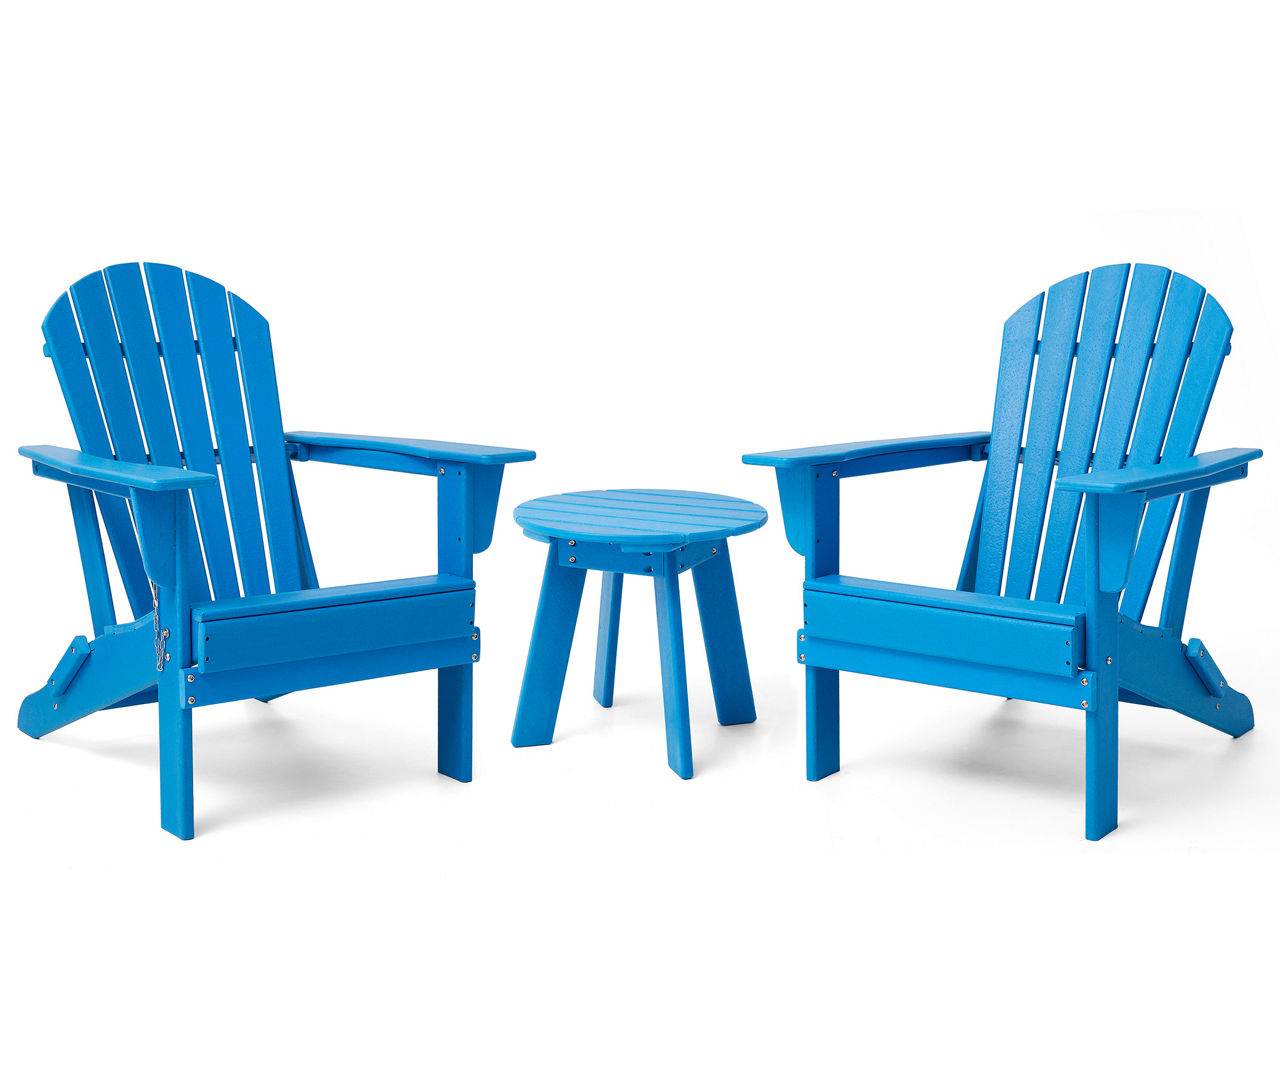 Blue 3-Piece Adirondack Outdoor Folding Chair & Side Table Set